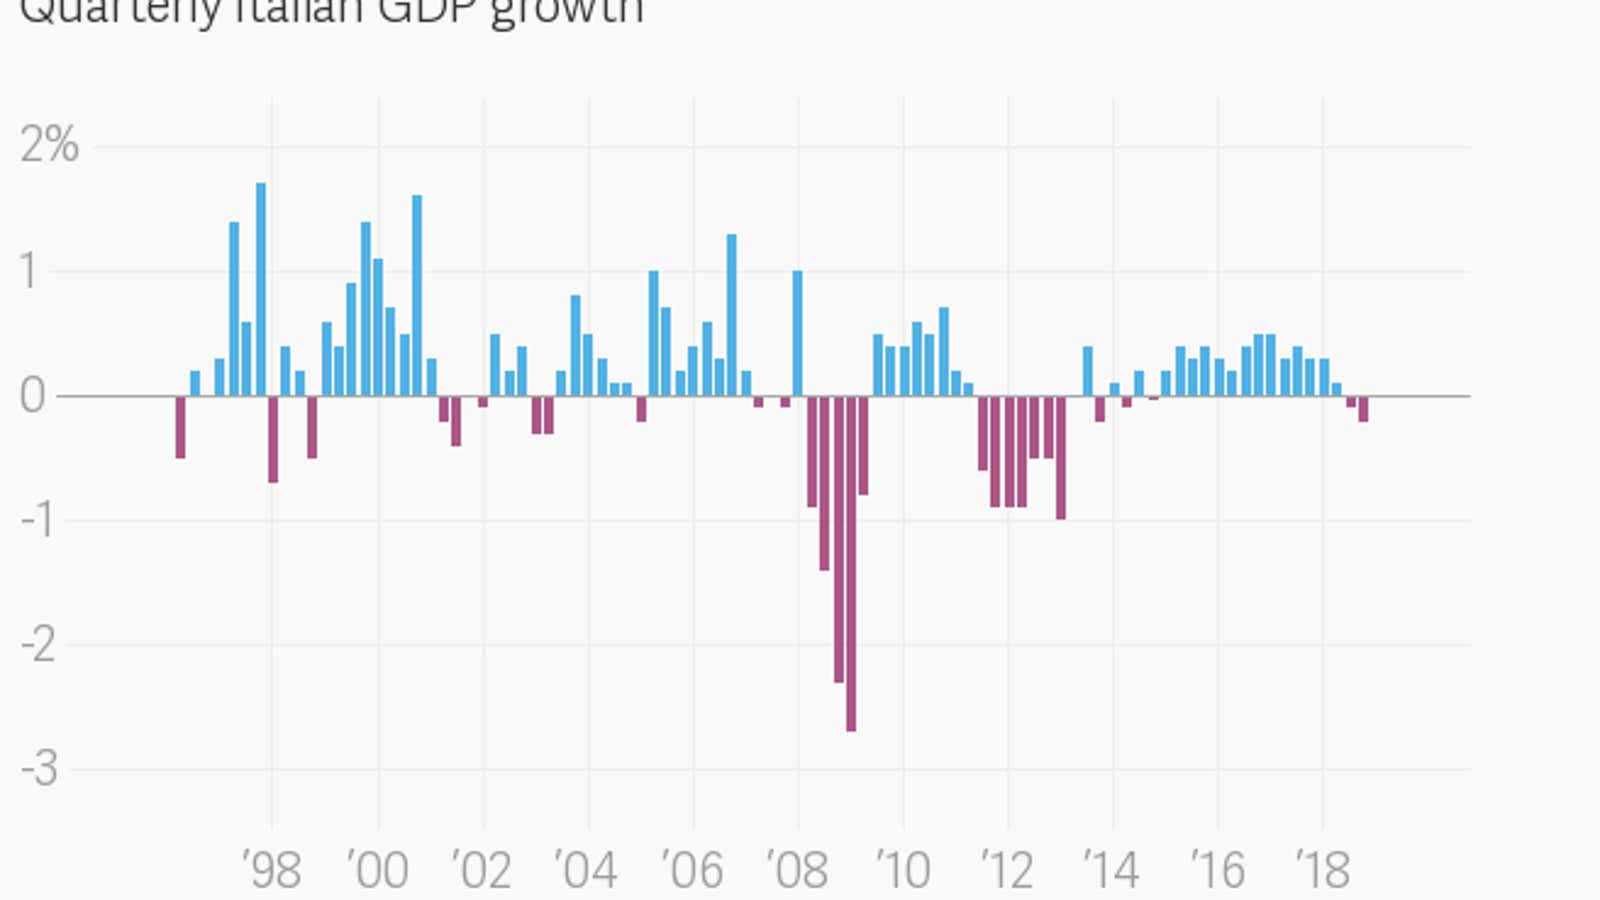 The chart of Italy’s economic growth tells a tragic tale